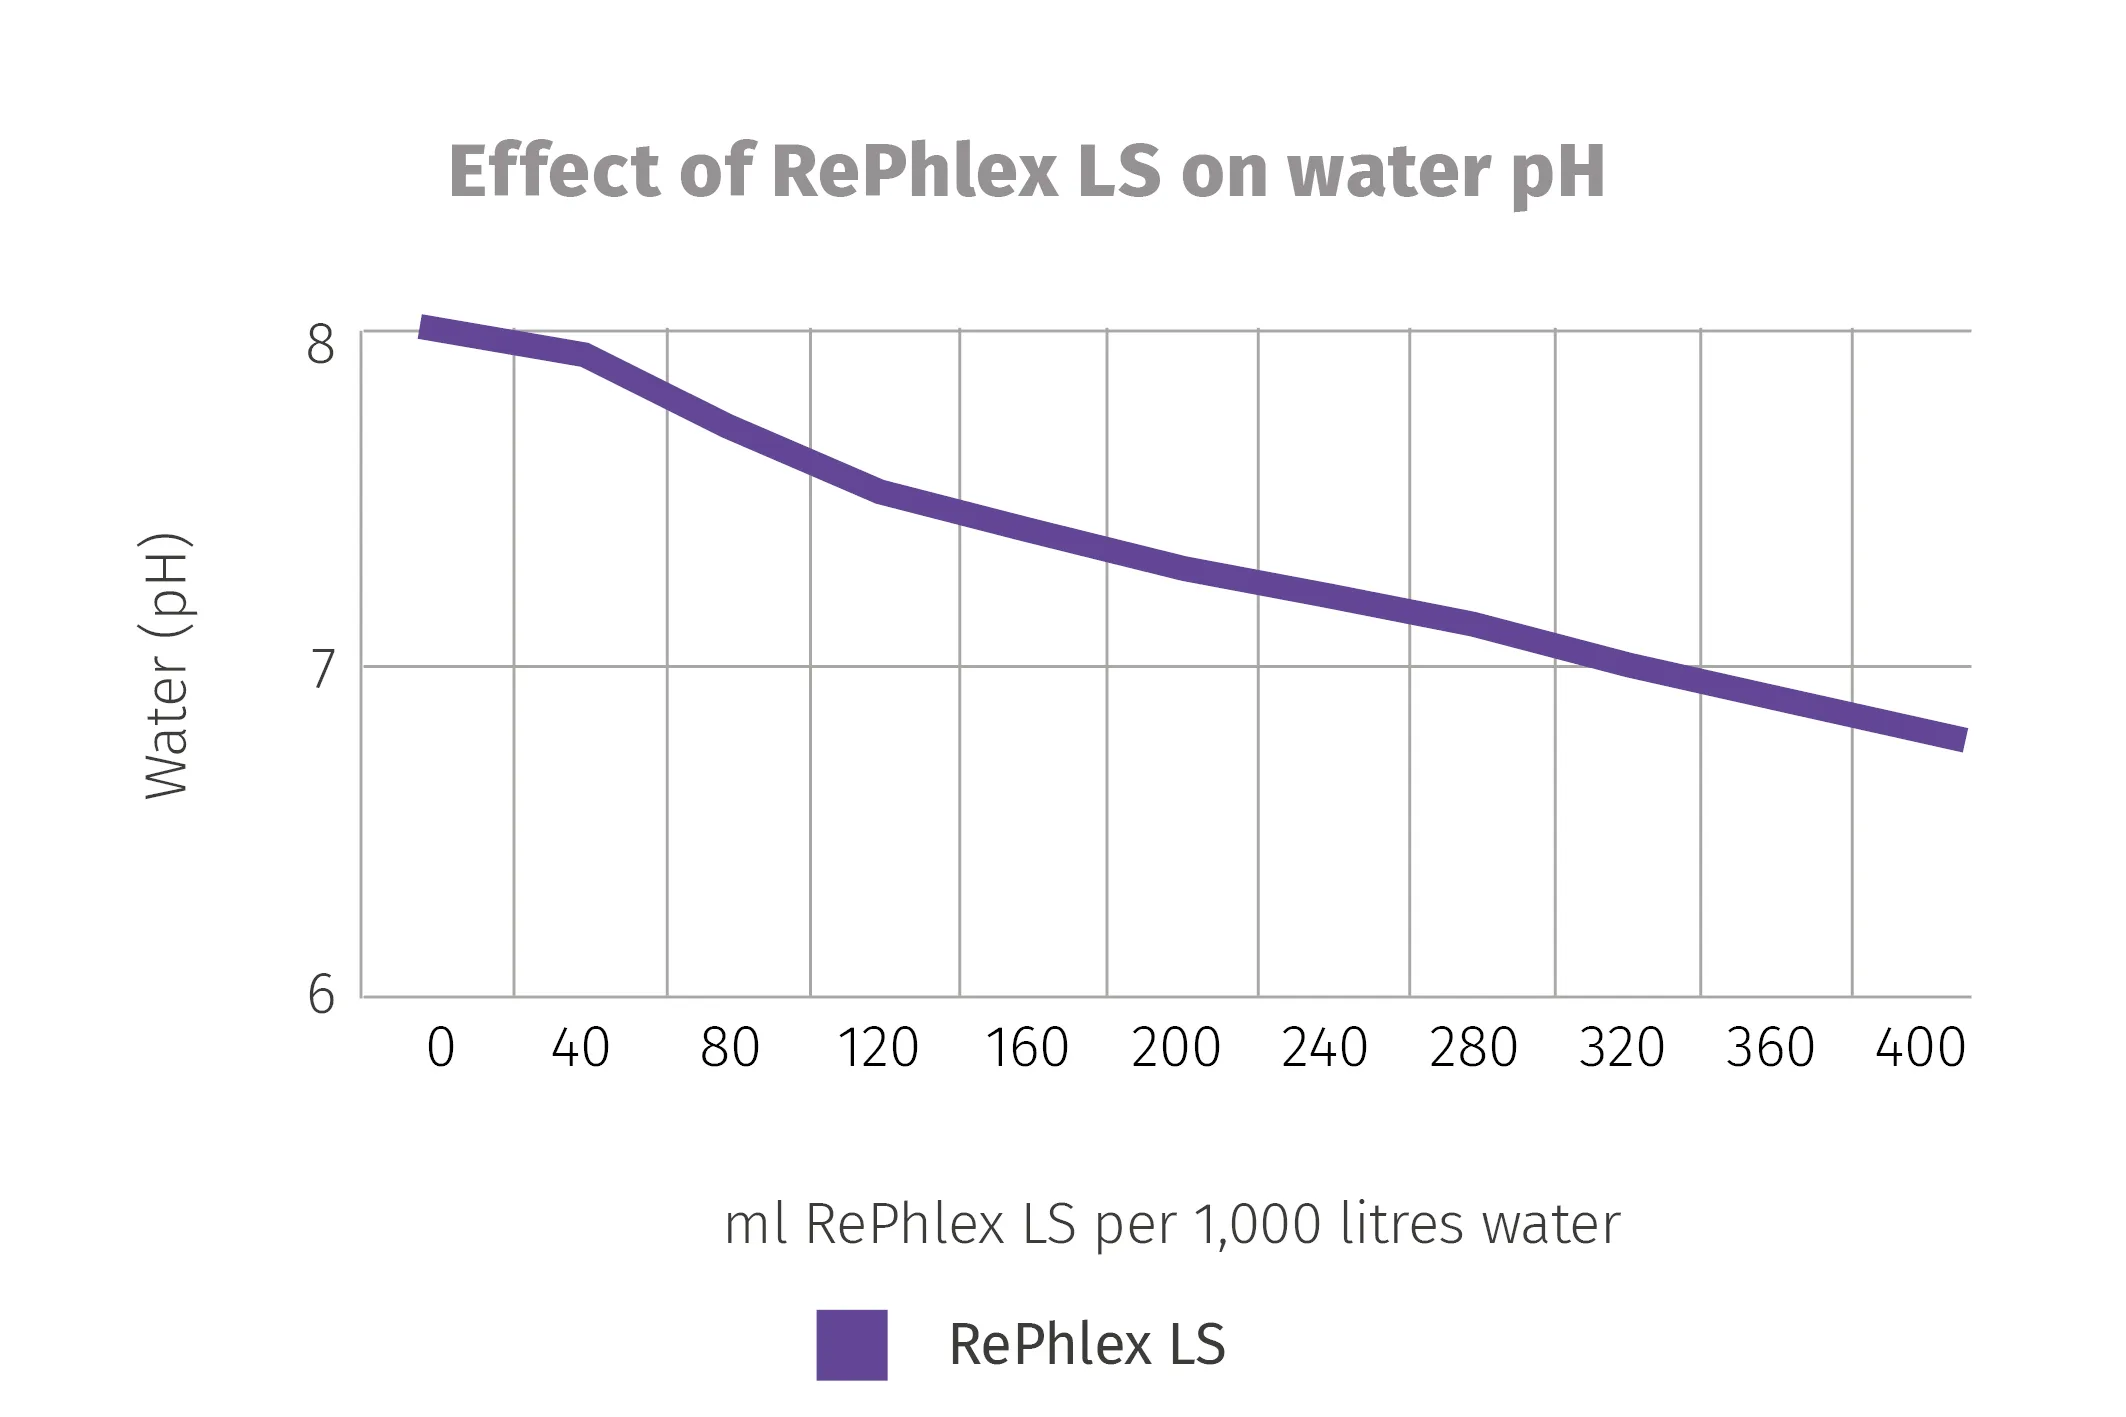 The effect of RePhlex LS on water pH to be used as a sustainable organic acid